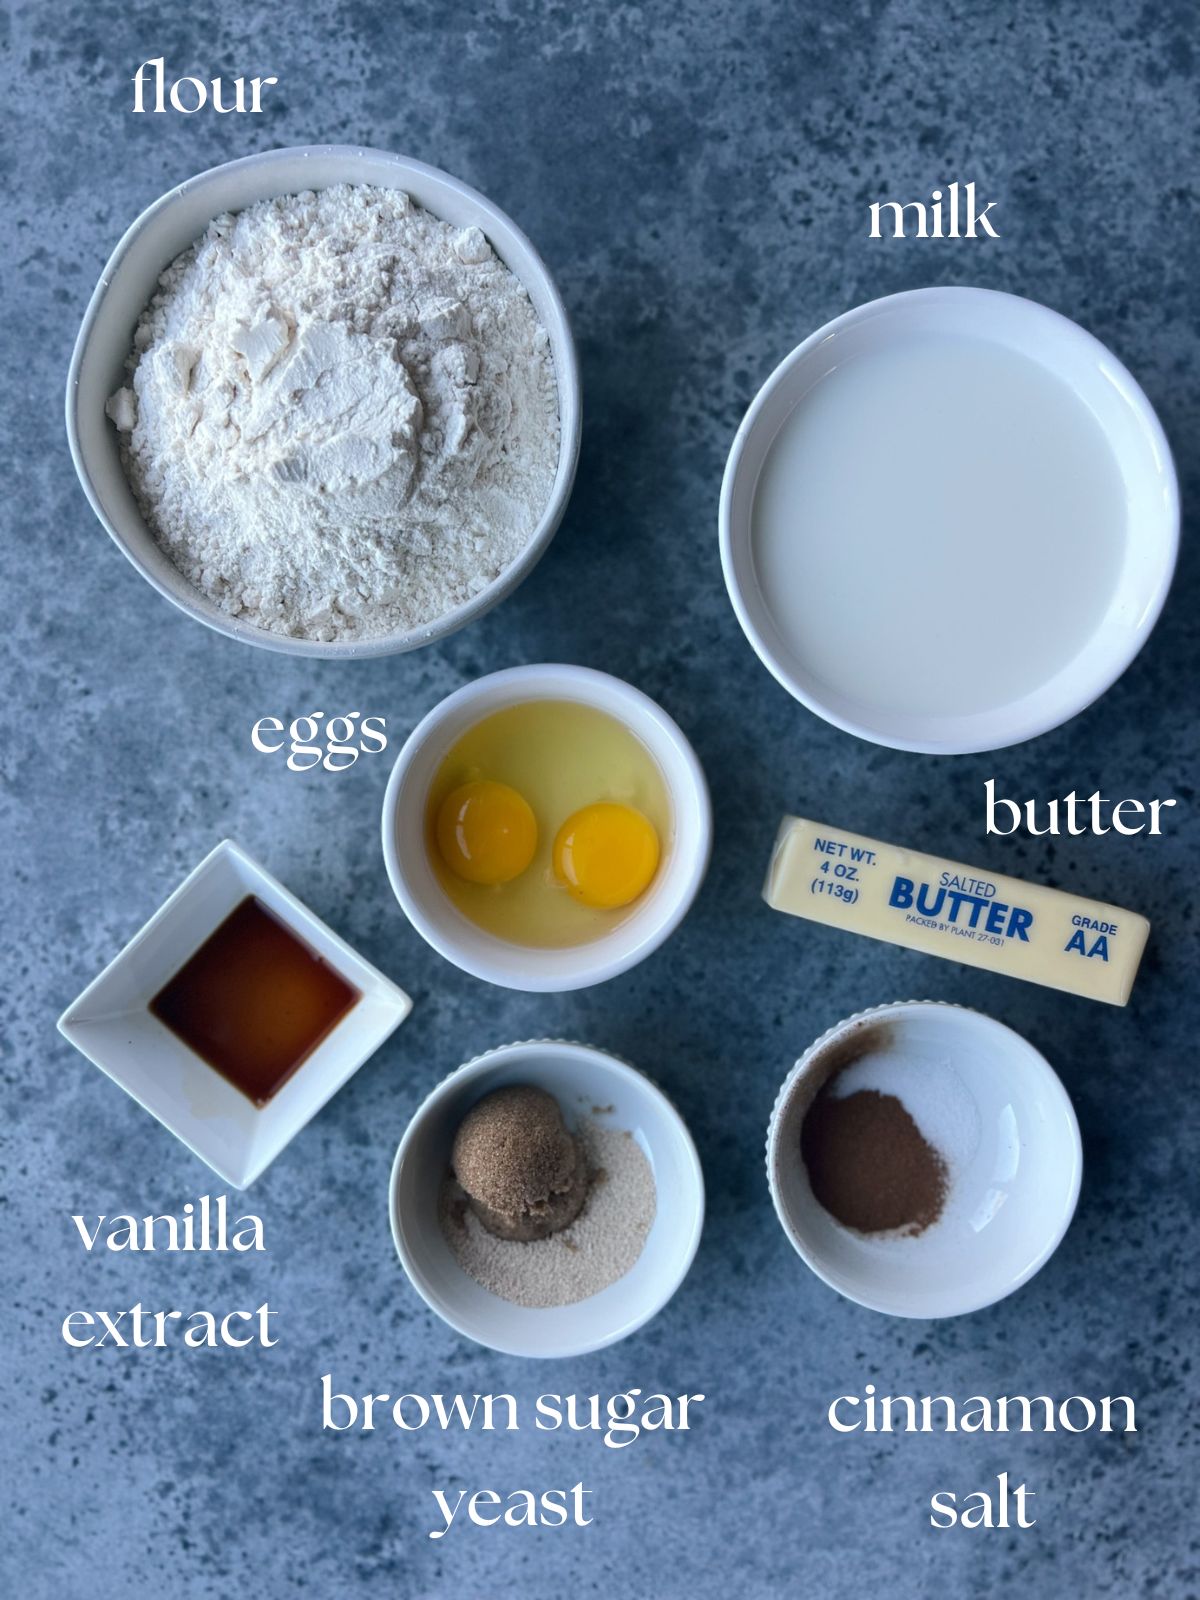 The ingredients for the dough.